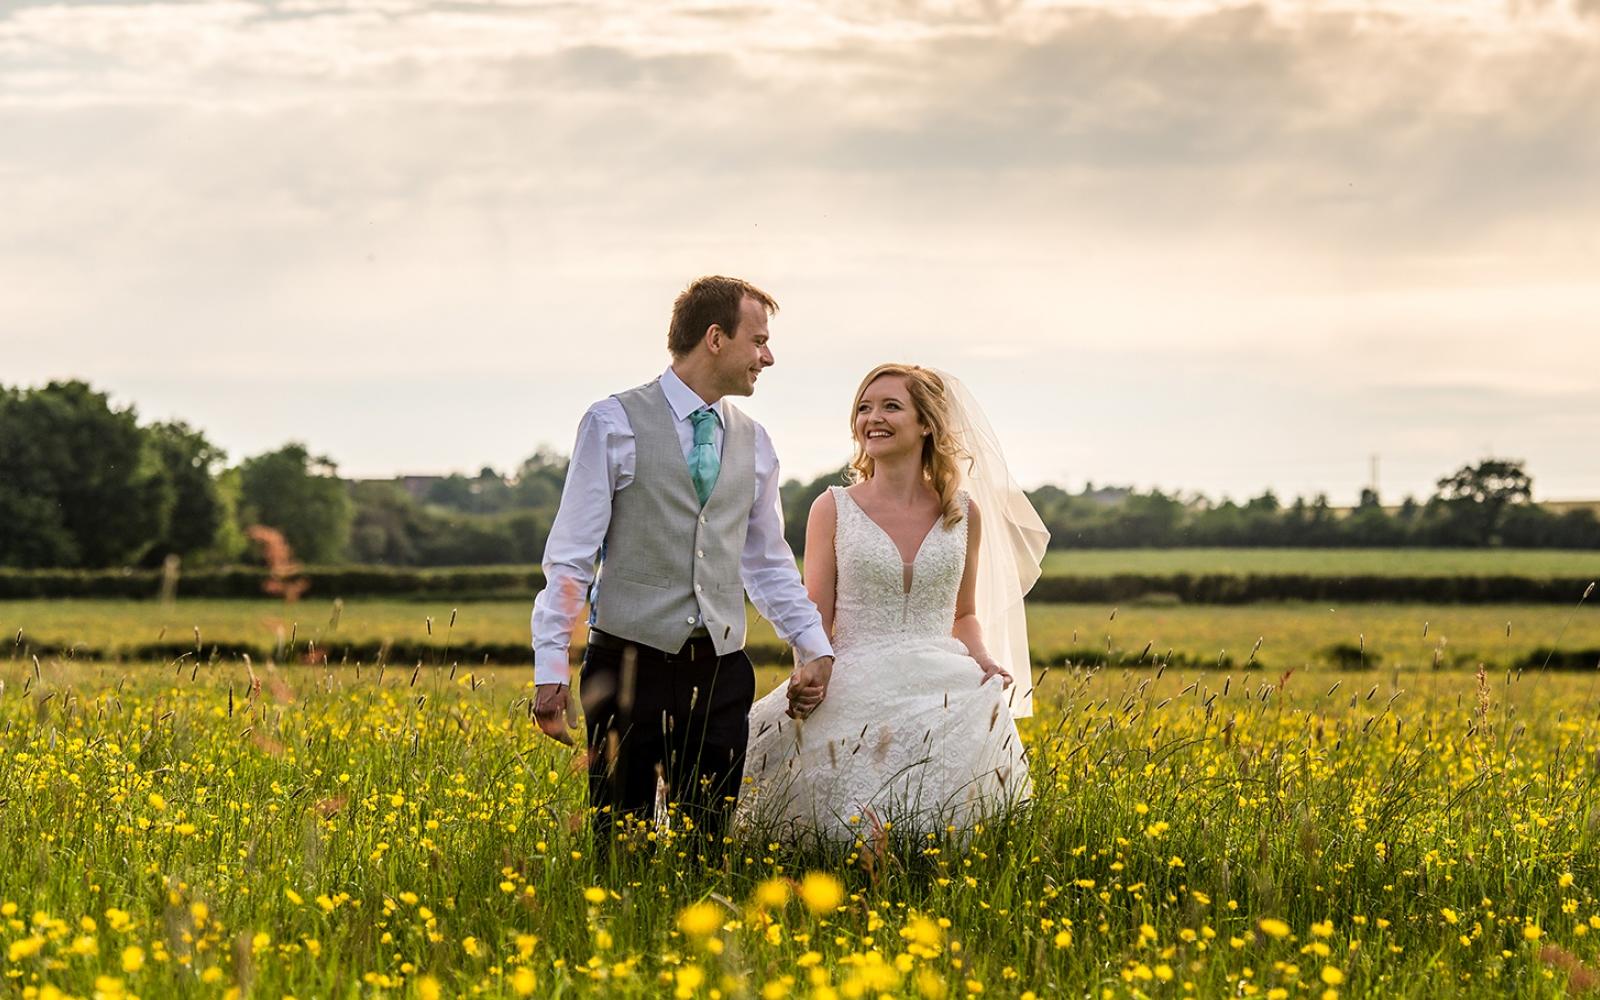 Capture Every Moment real wedding photography duo photographer Cirencester  Church of St Mary The Virgin Bampton Spittleborough Farm Wiltshire walking in the fields short veil 